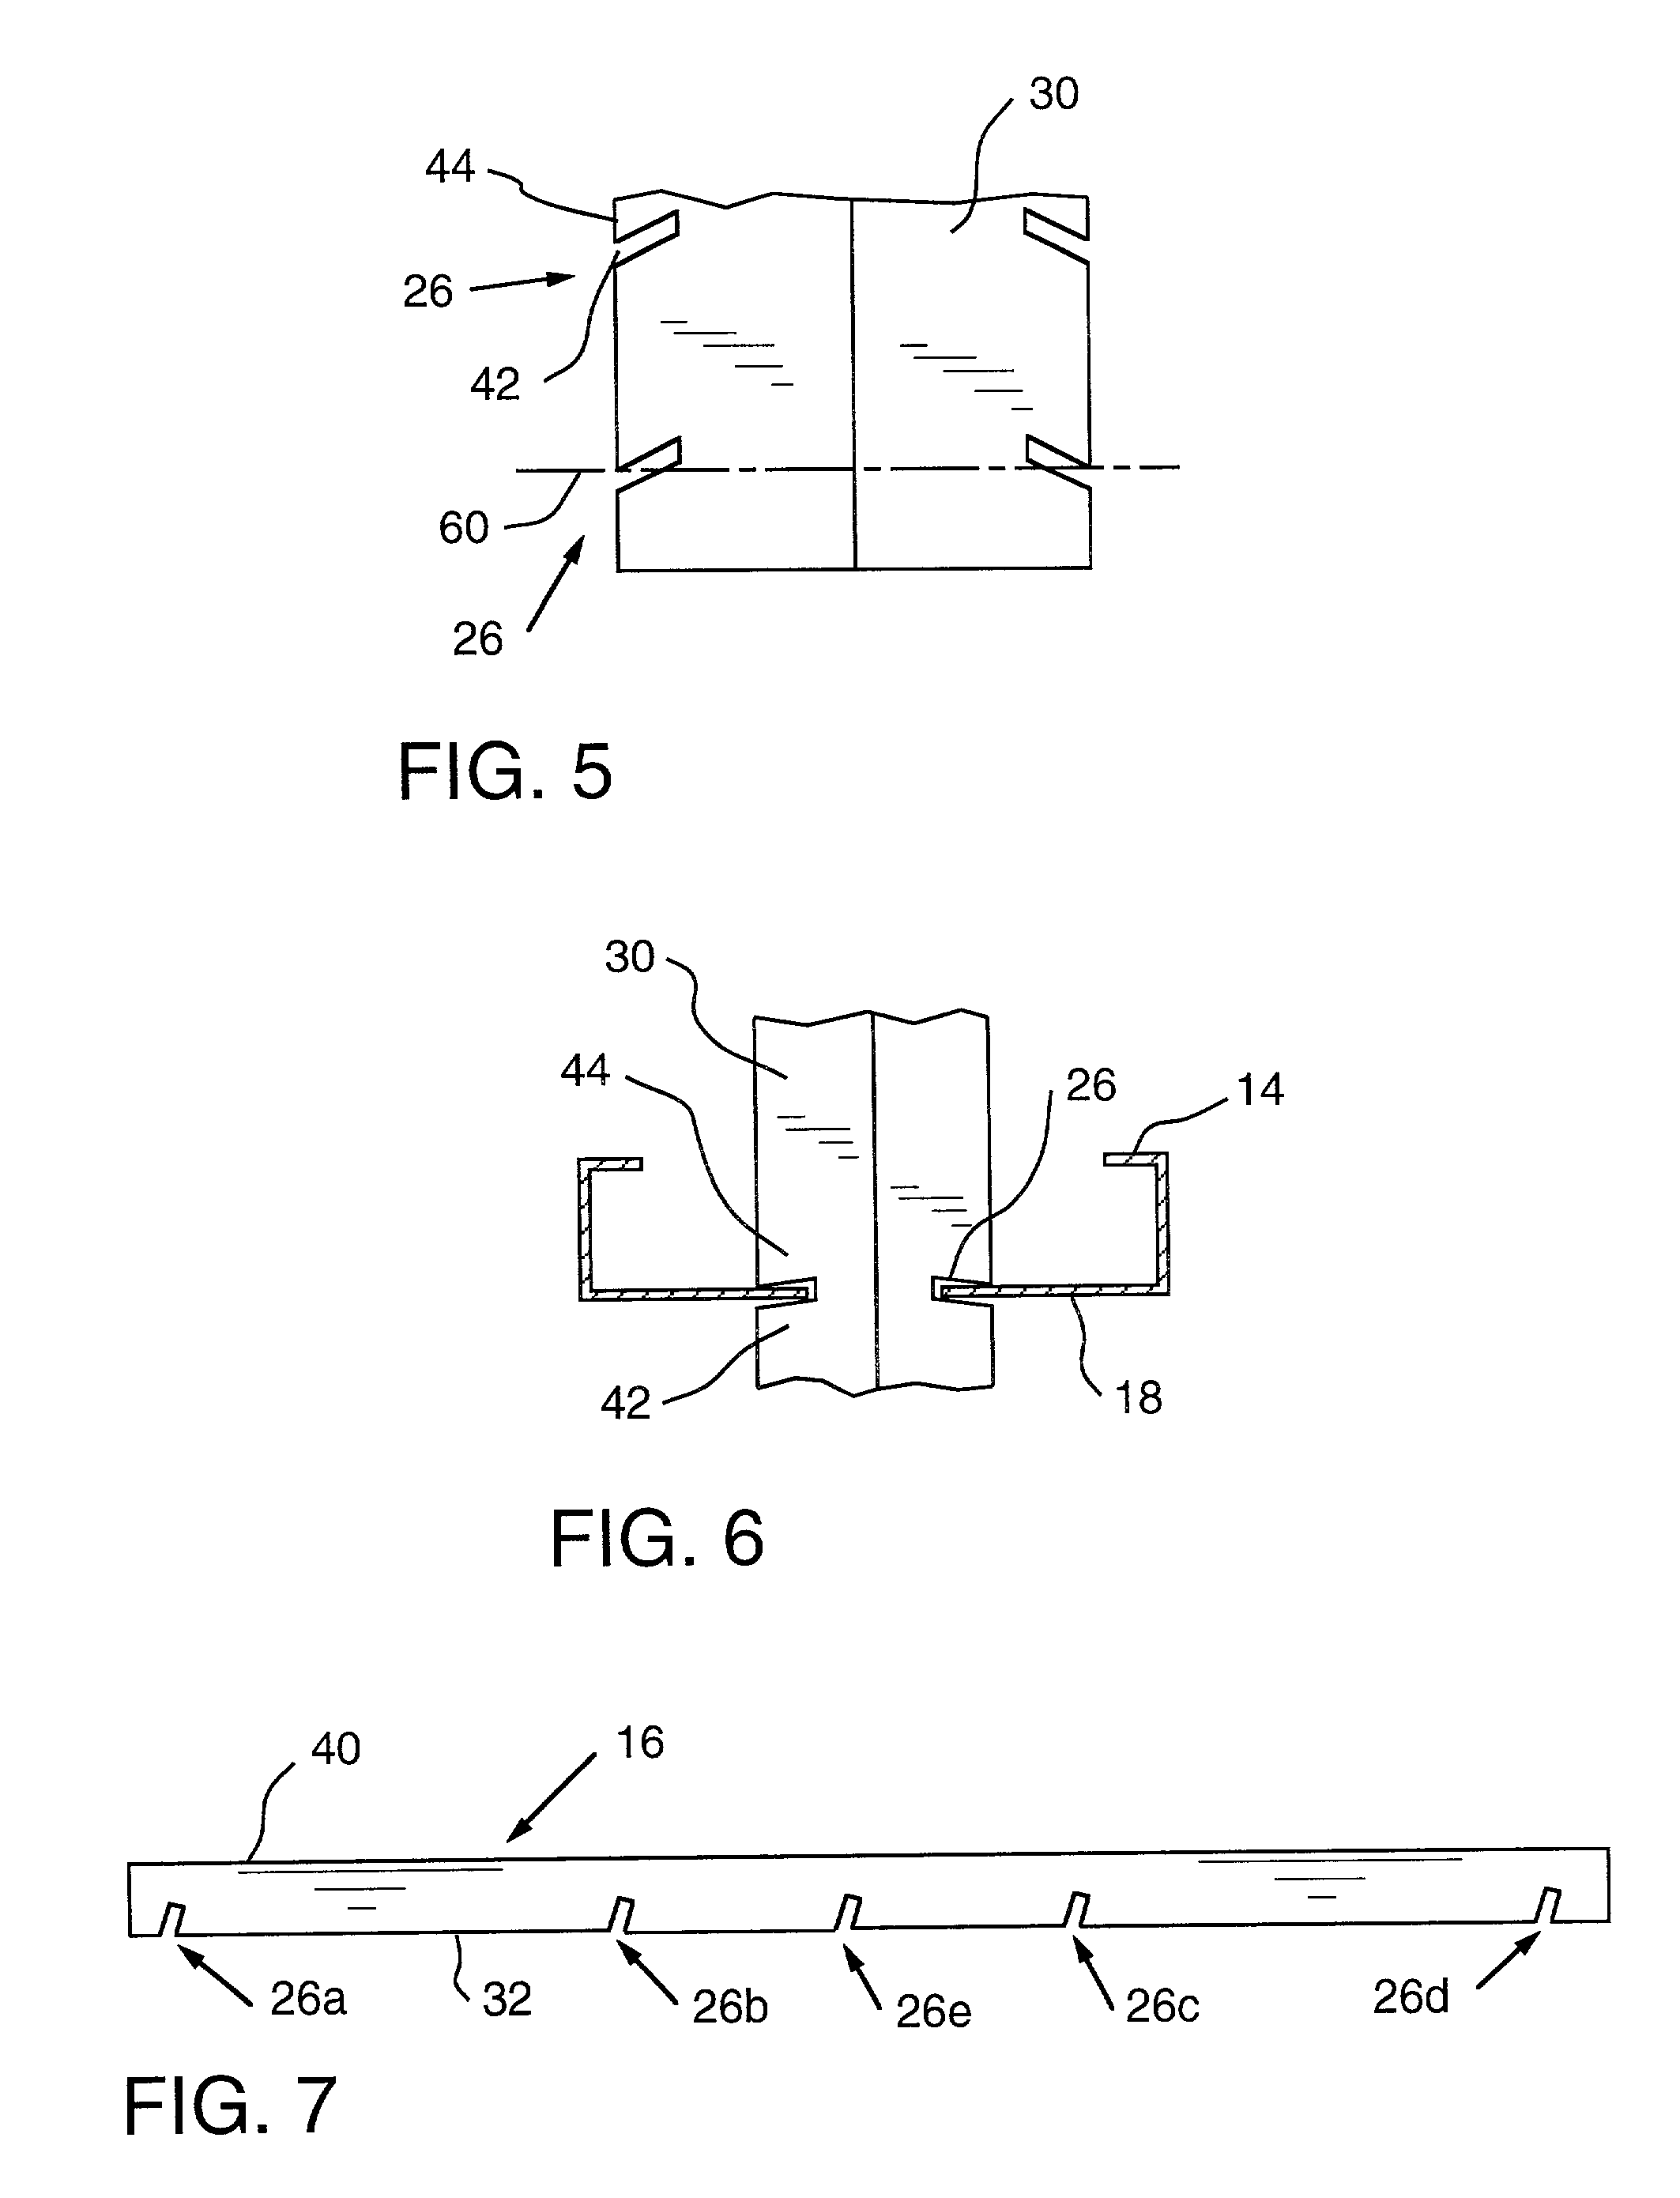 Bridging system for off-module studs